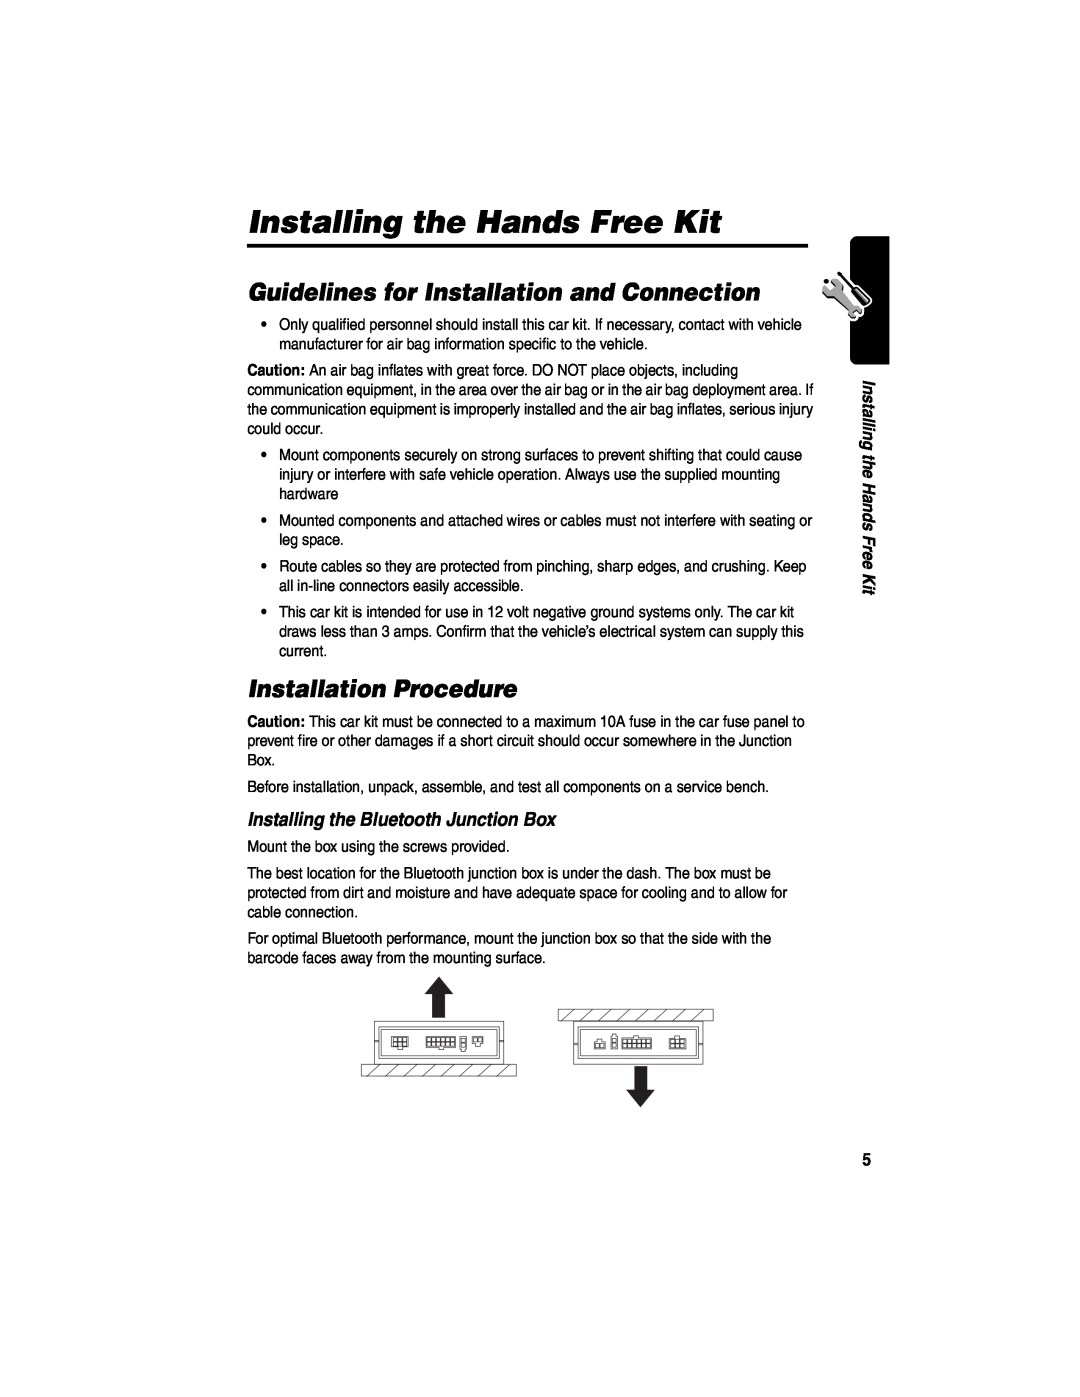 Motorola 89589N manual Installing the Hands Free Kit, Guidelines for Installation and Connection, Installation Procedure 